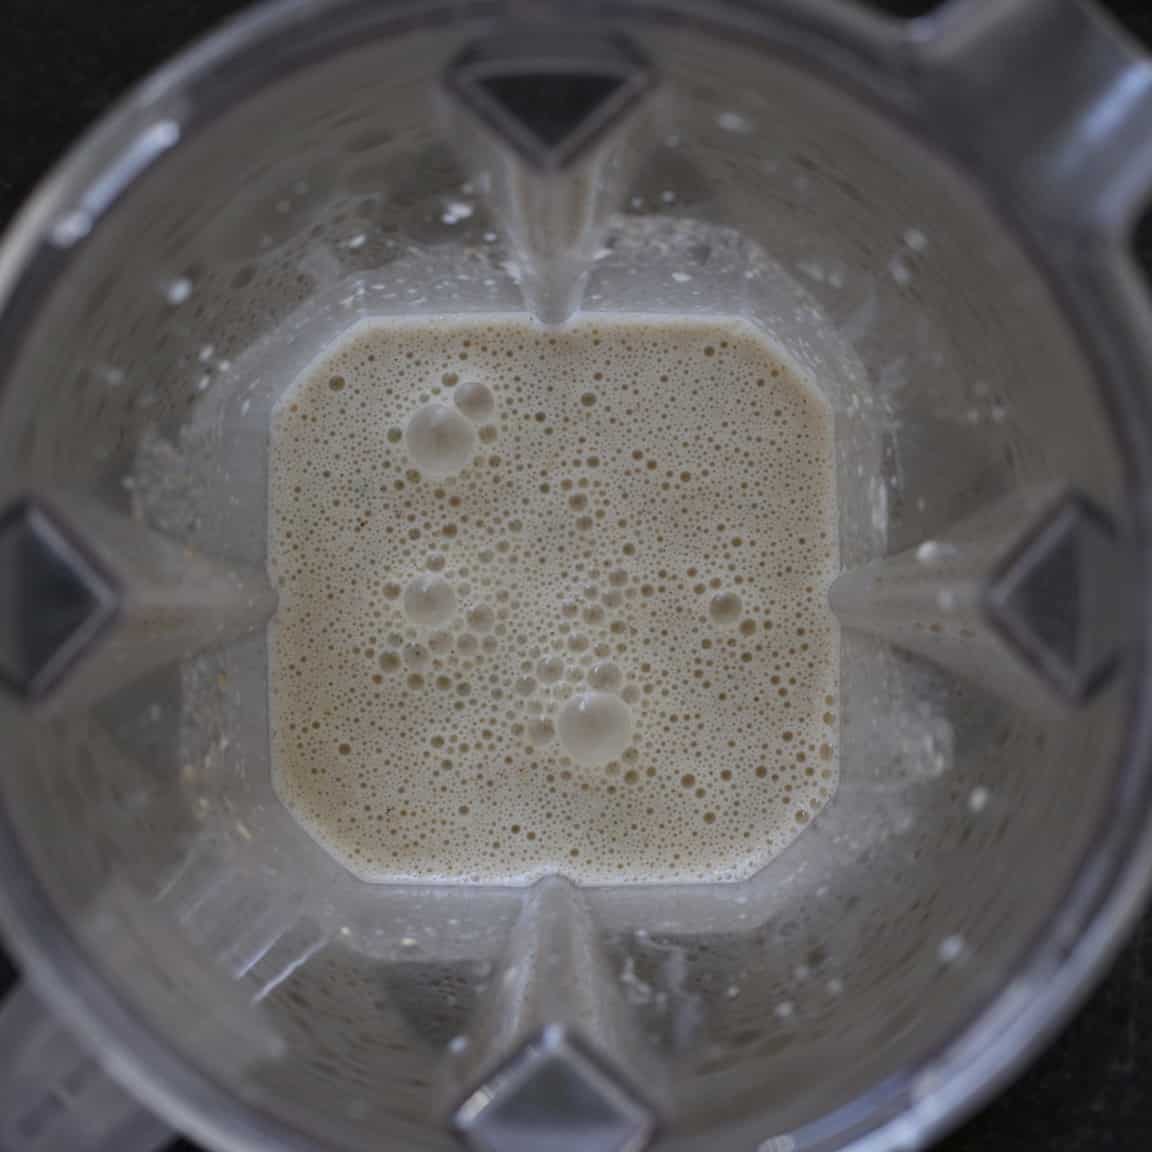 Inside shot of a blender with a creamy looking smoothie